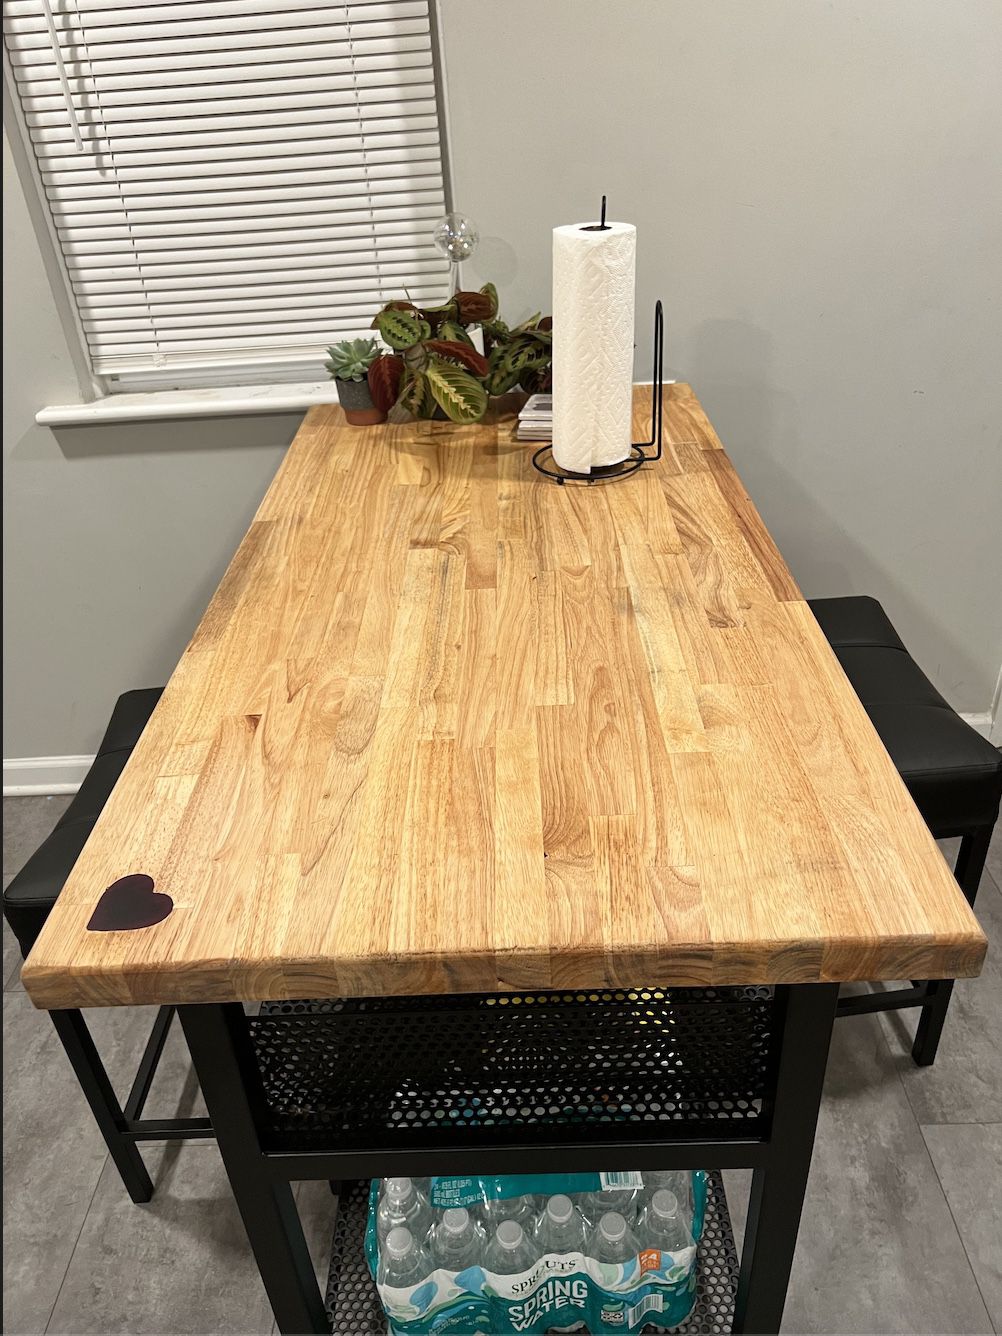 Purple Heart Wood Table With Storage